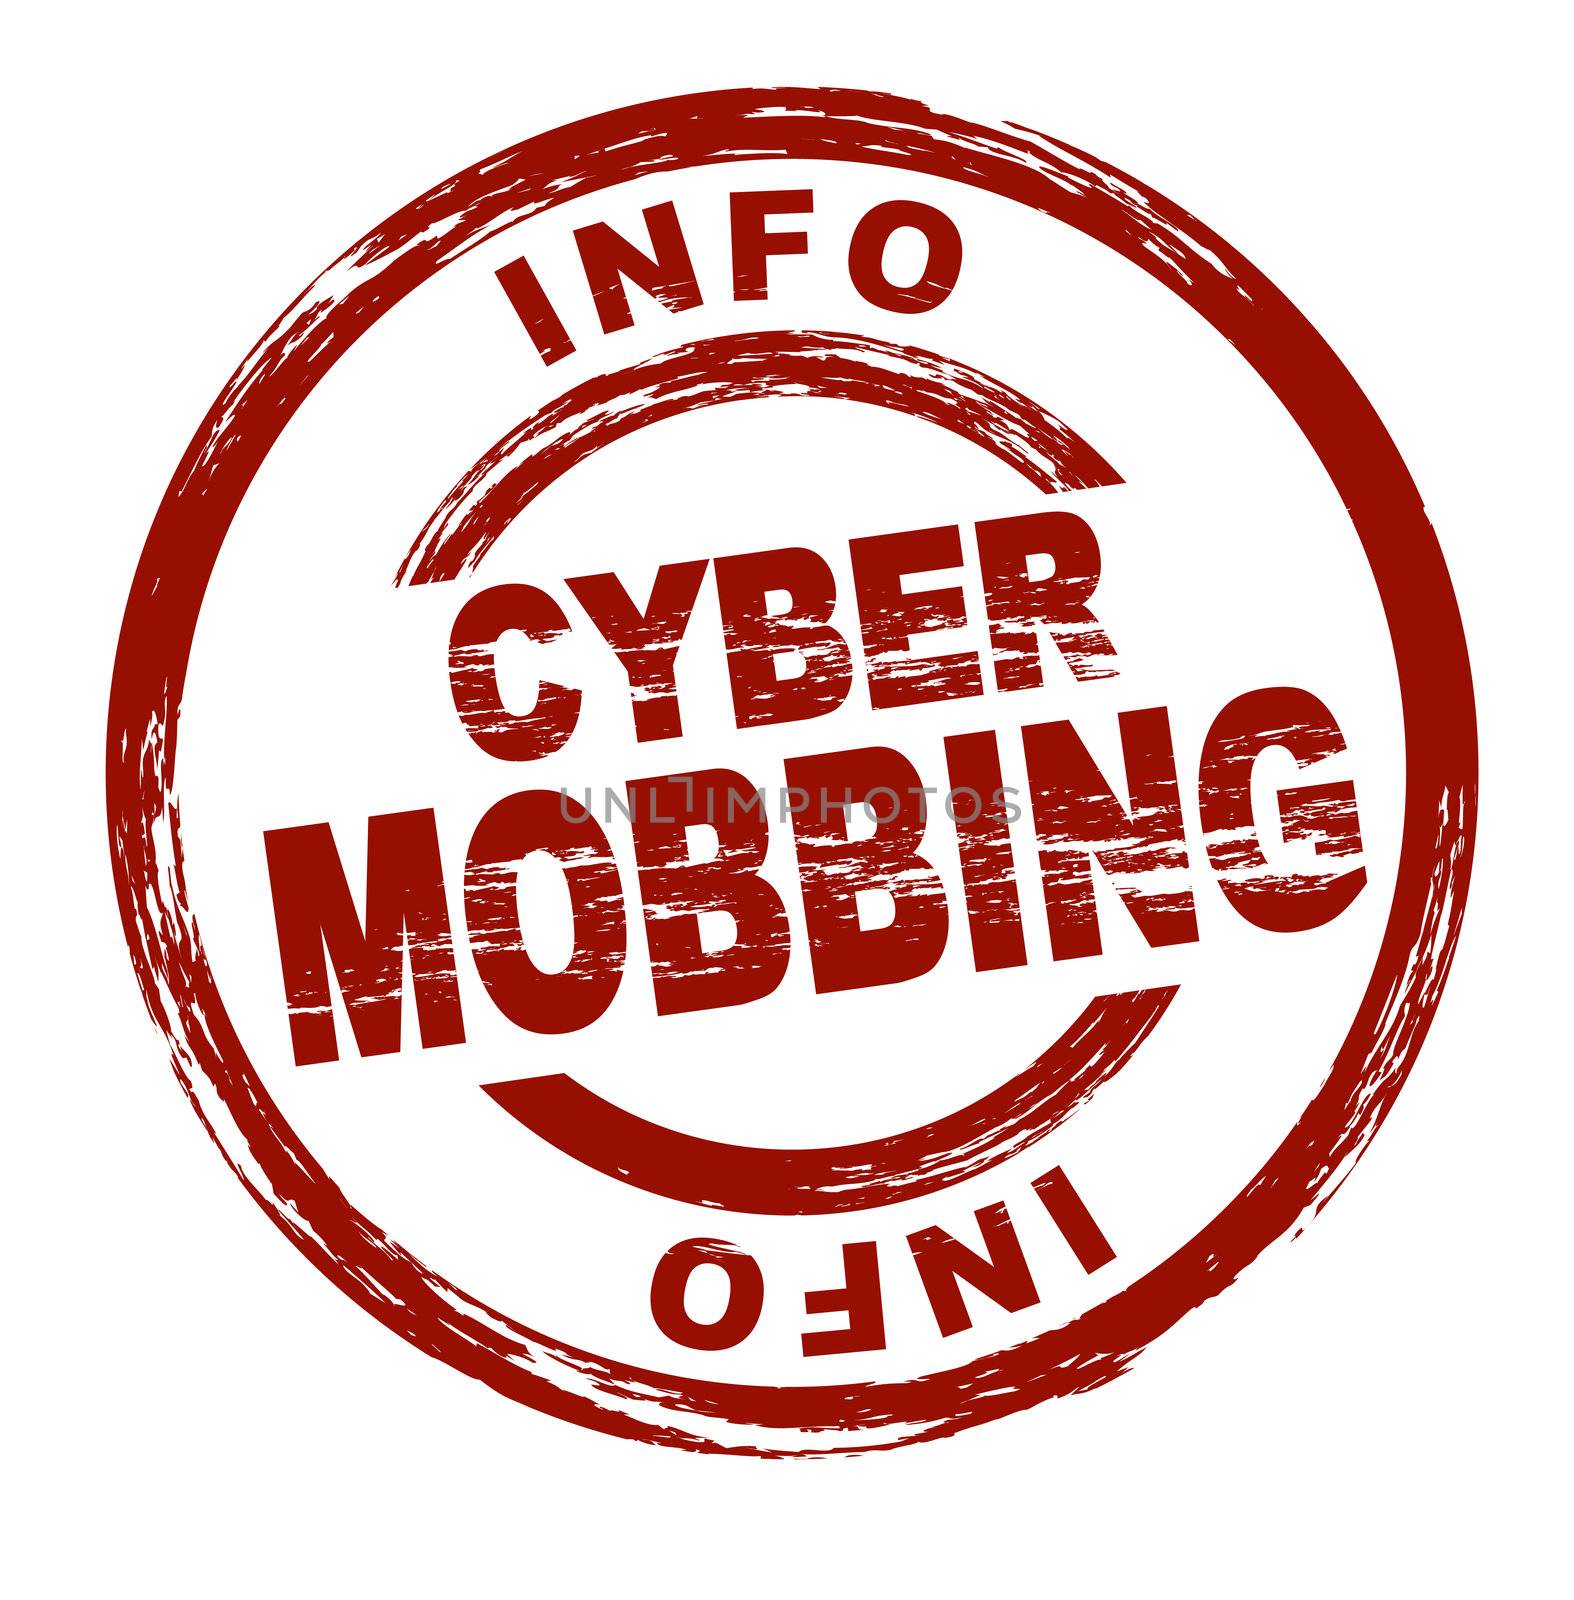 Stamp - Cyber mobbing (Engl.: cyber bullying) by kaarsten